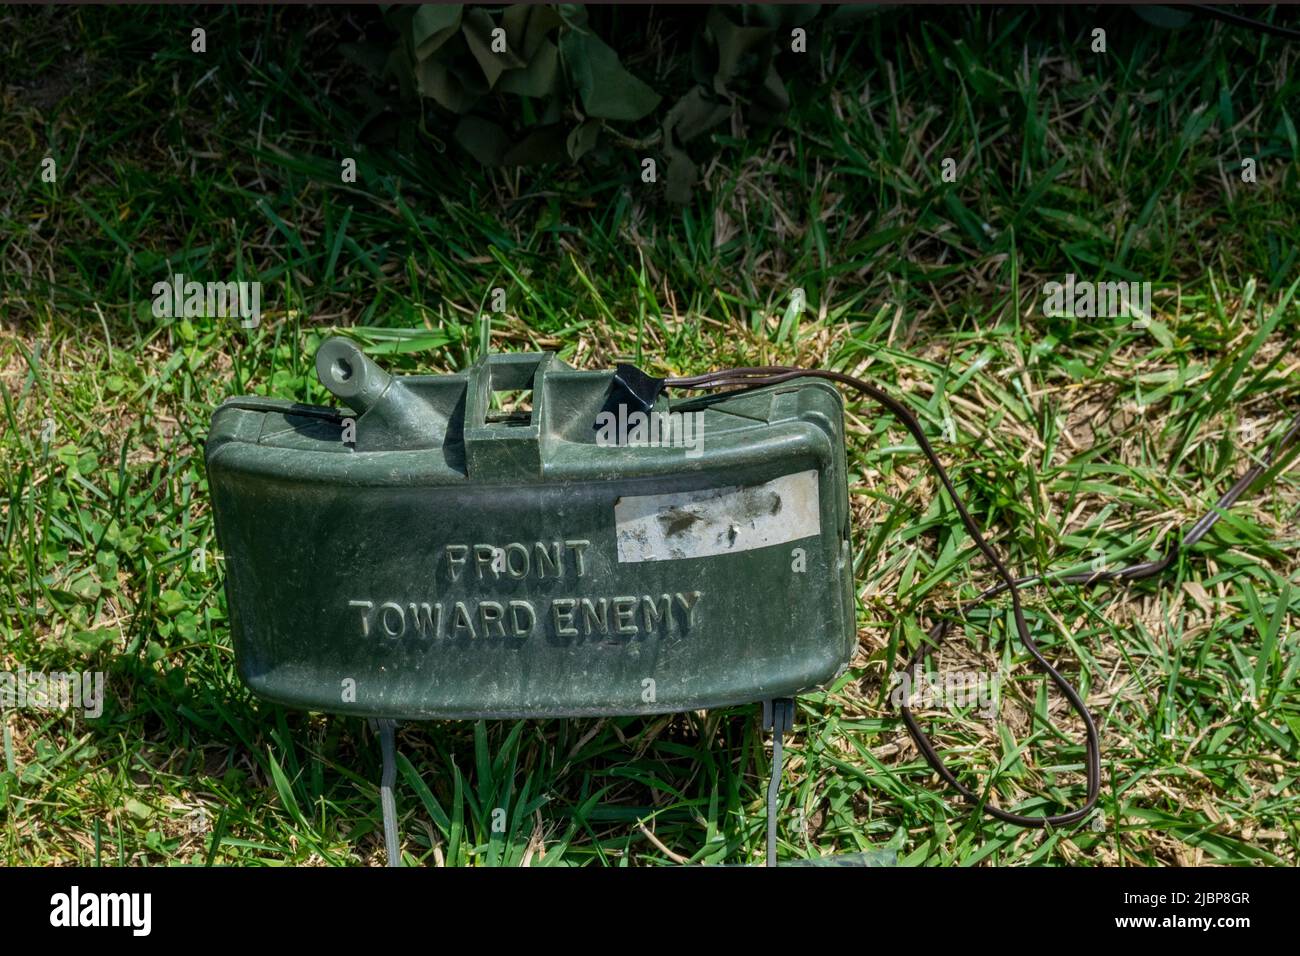 Mines Anti personal. The Claymore mine is a directional anti-personnel mine developed for the United States Armed Forces. Its inventor, Norman MacLeod. Stock Photo